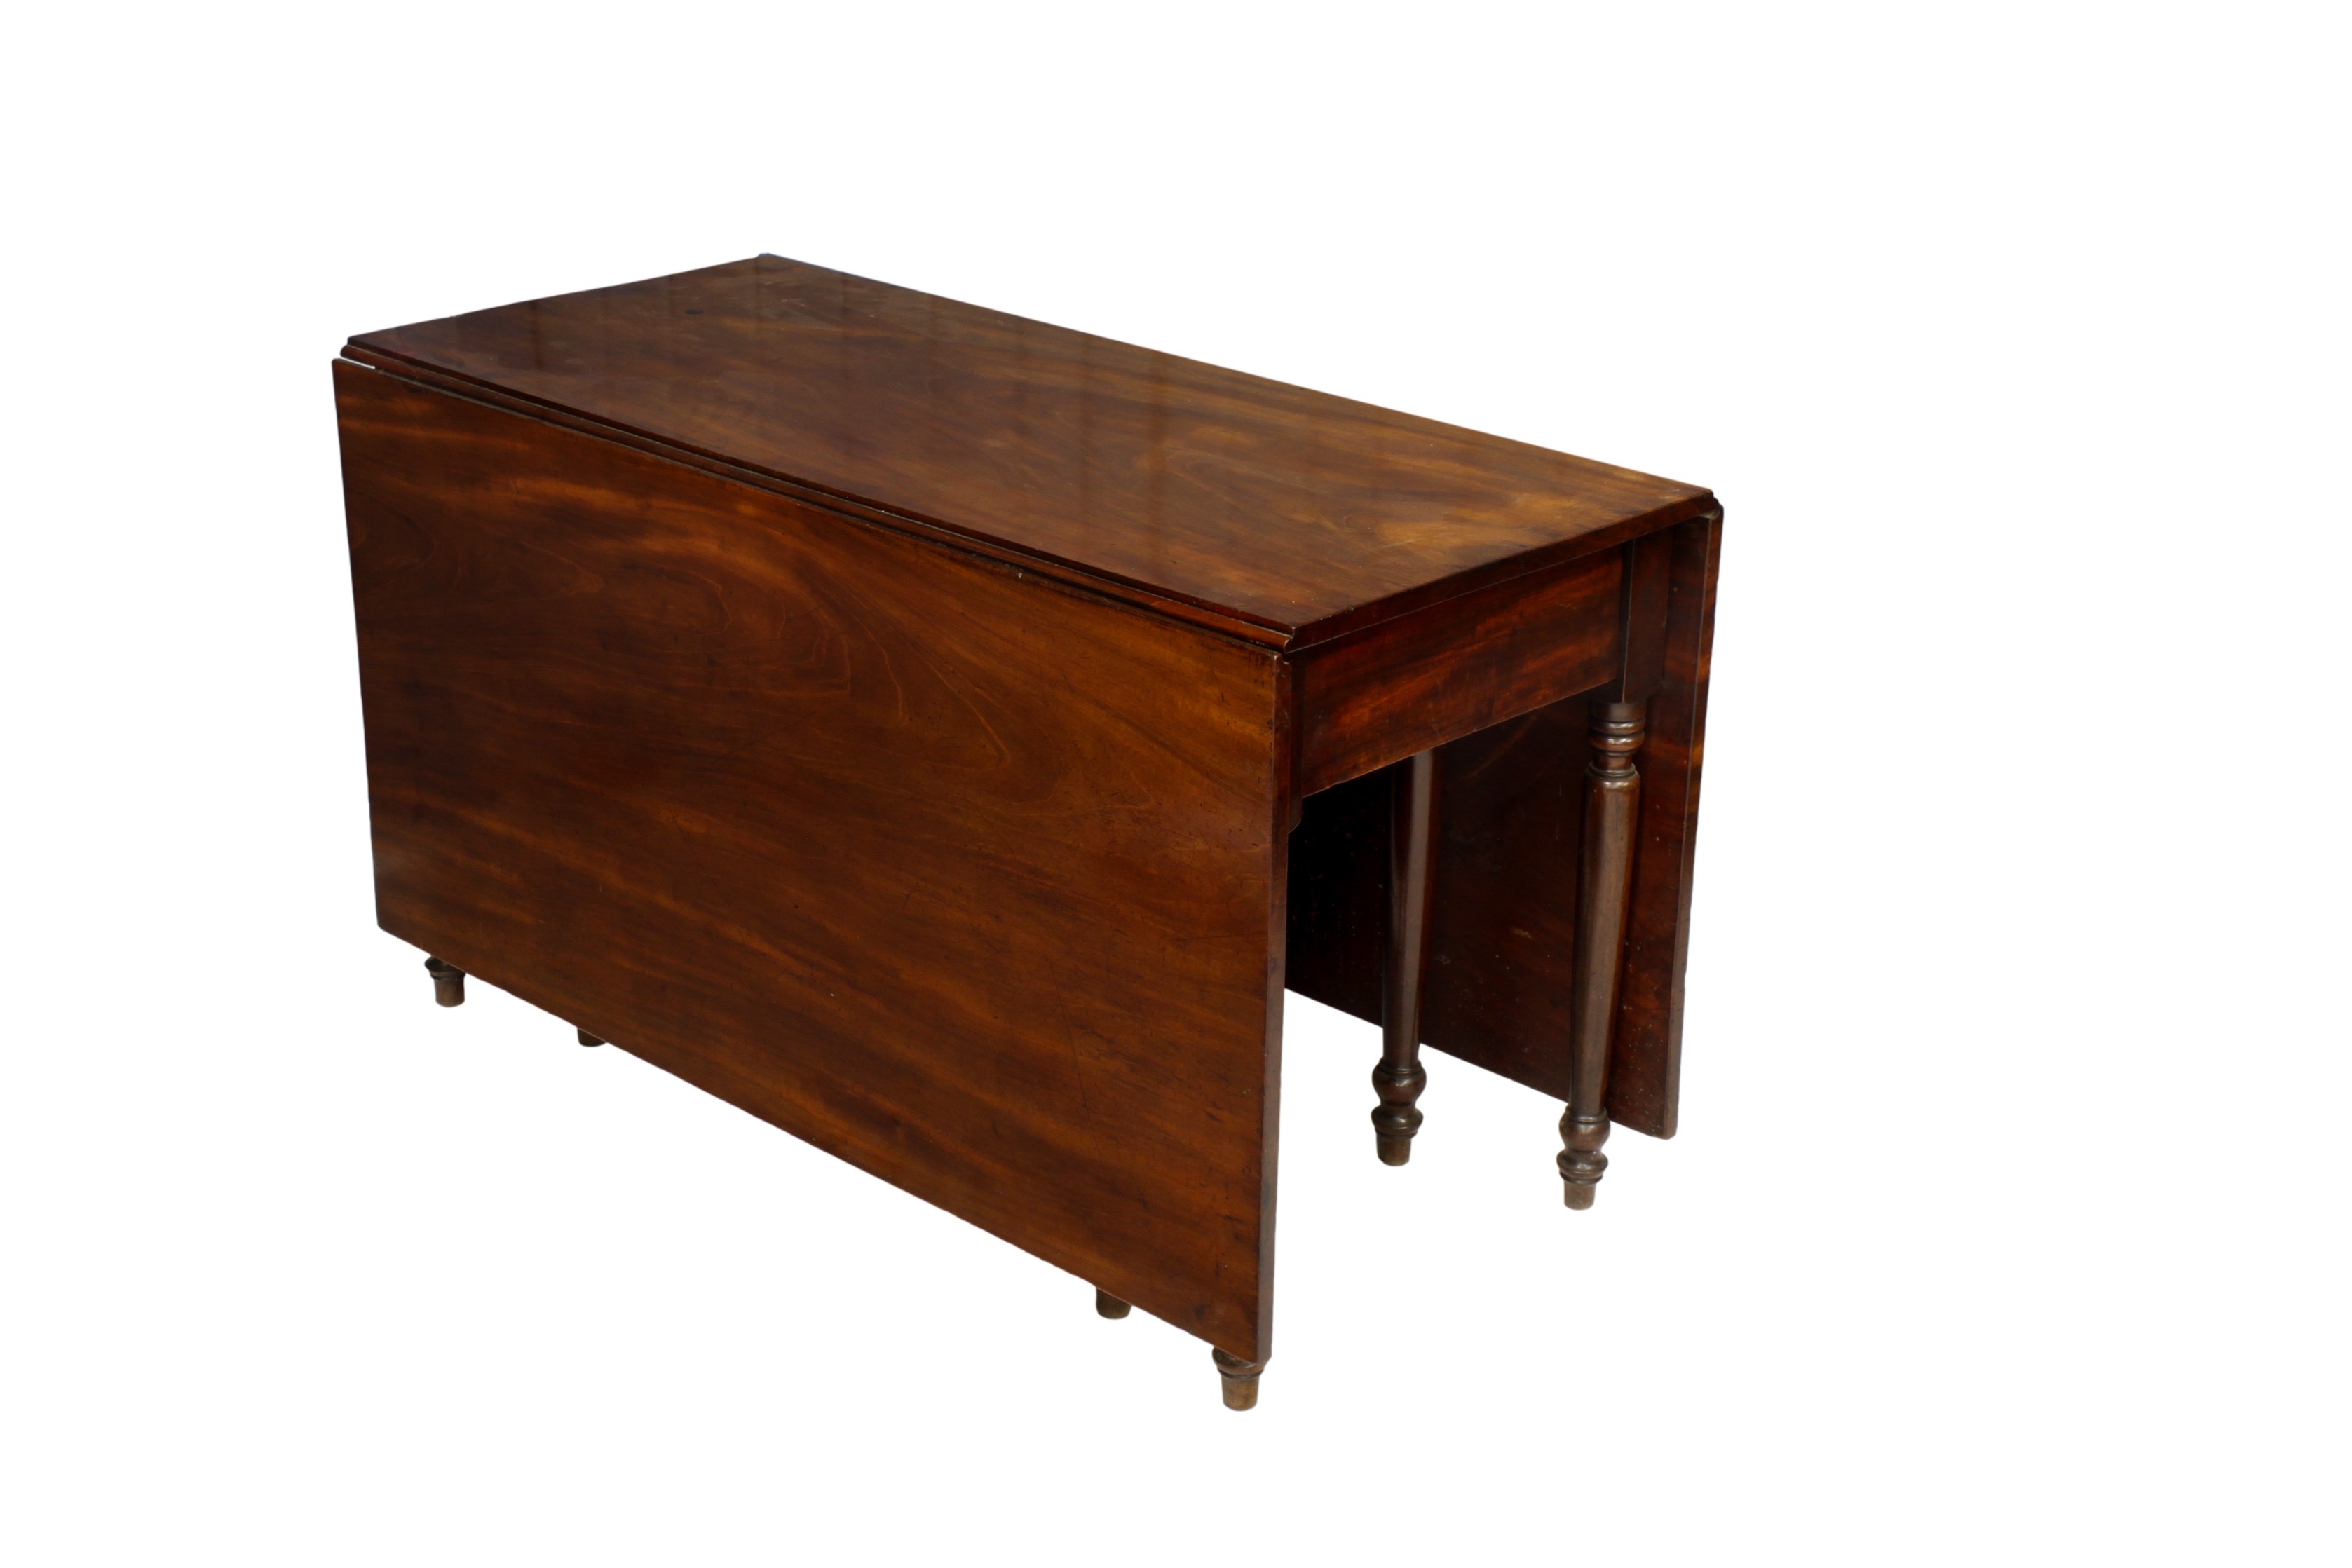 Elizabeth College interest - A good early 19th century mahogany dropflap dining table, the top and